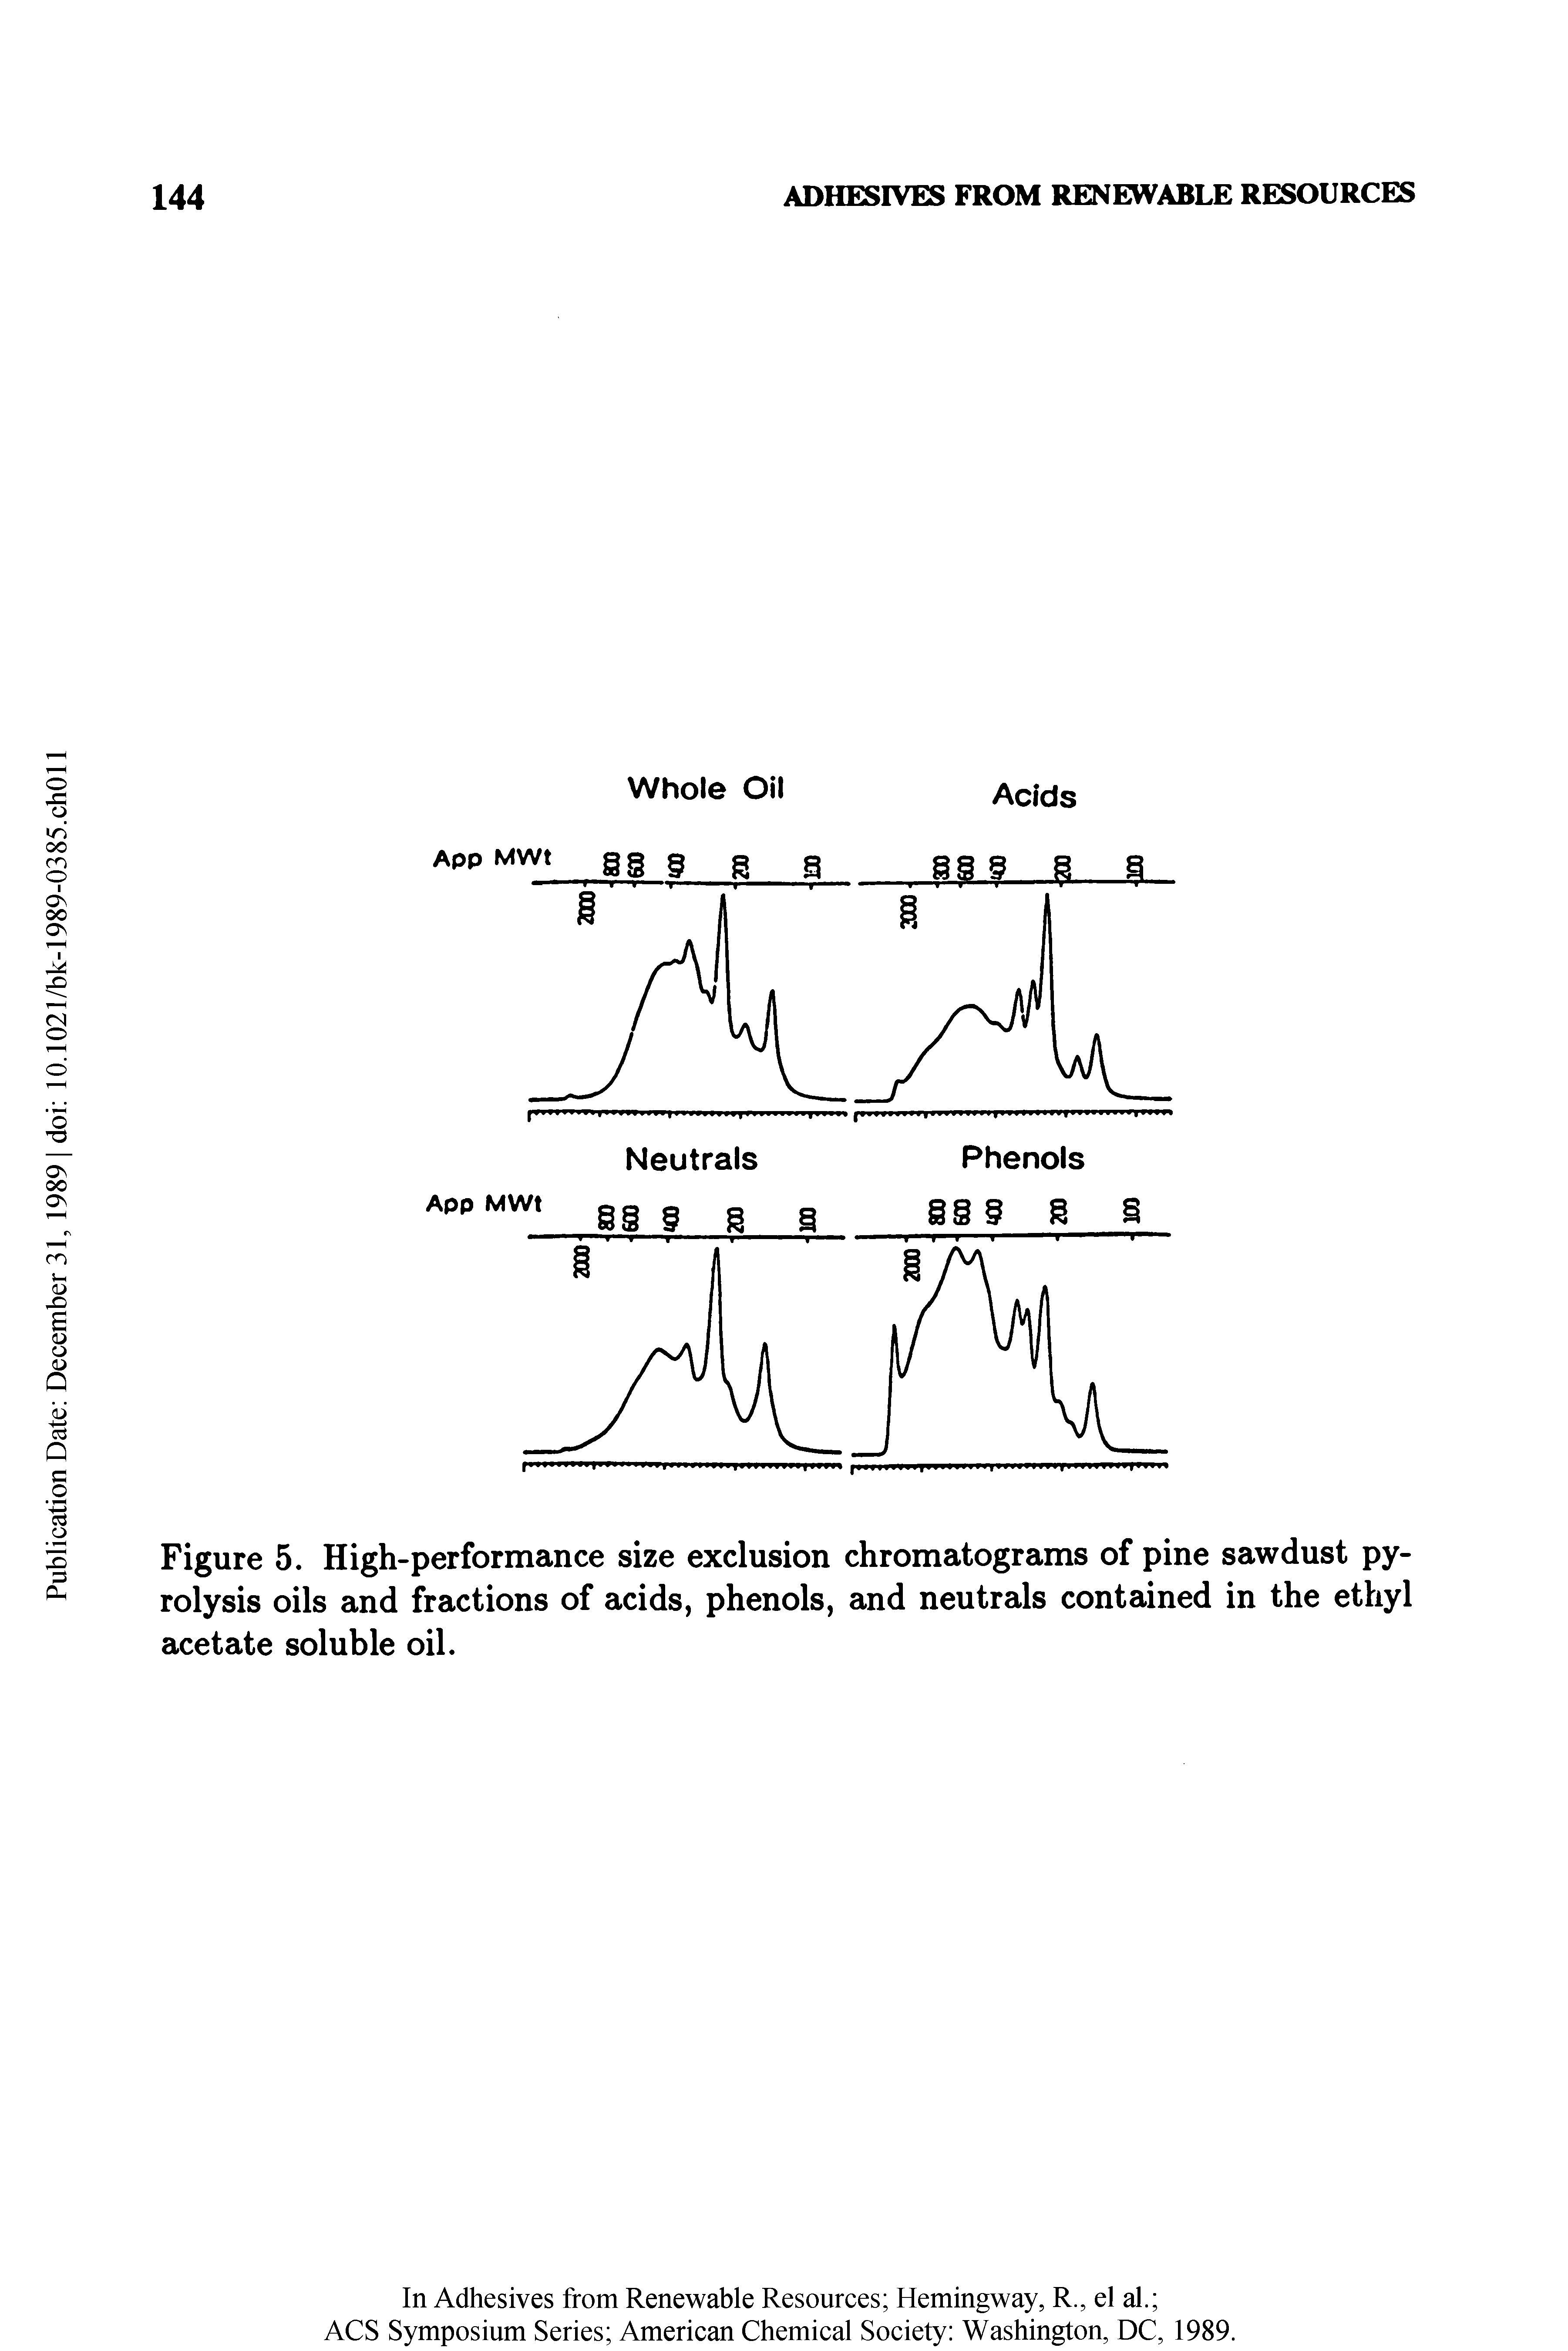 Figure 5. High-performance size exclusion chromatograms of pine sawdust pyrolysis oils and fractions of acids, phenols, and neutrals contained in the ethyl acetate soluble oil.